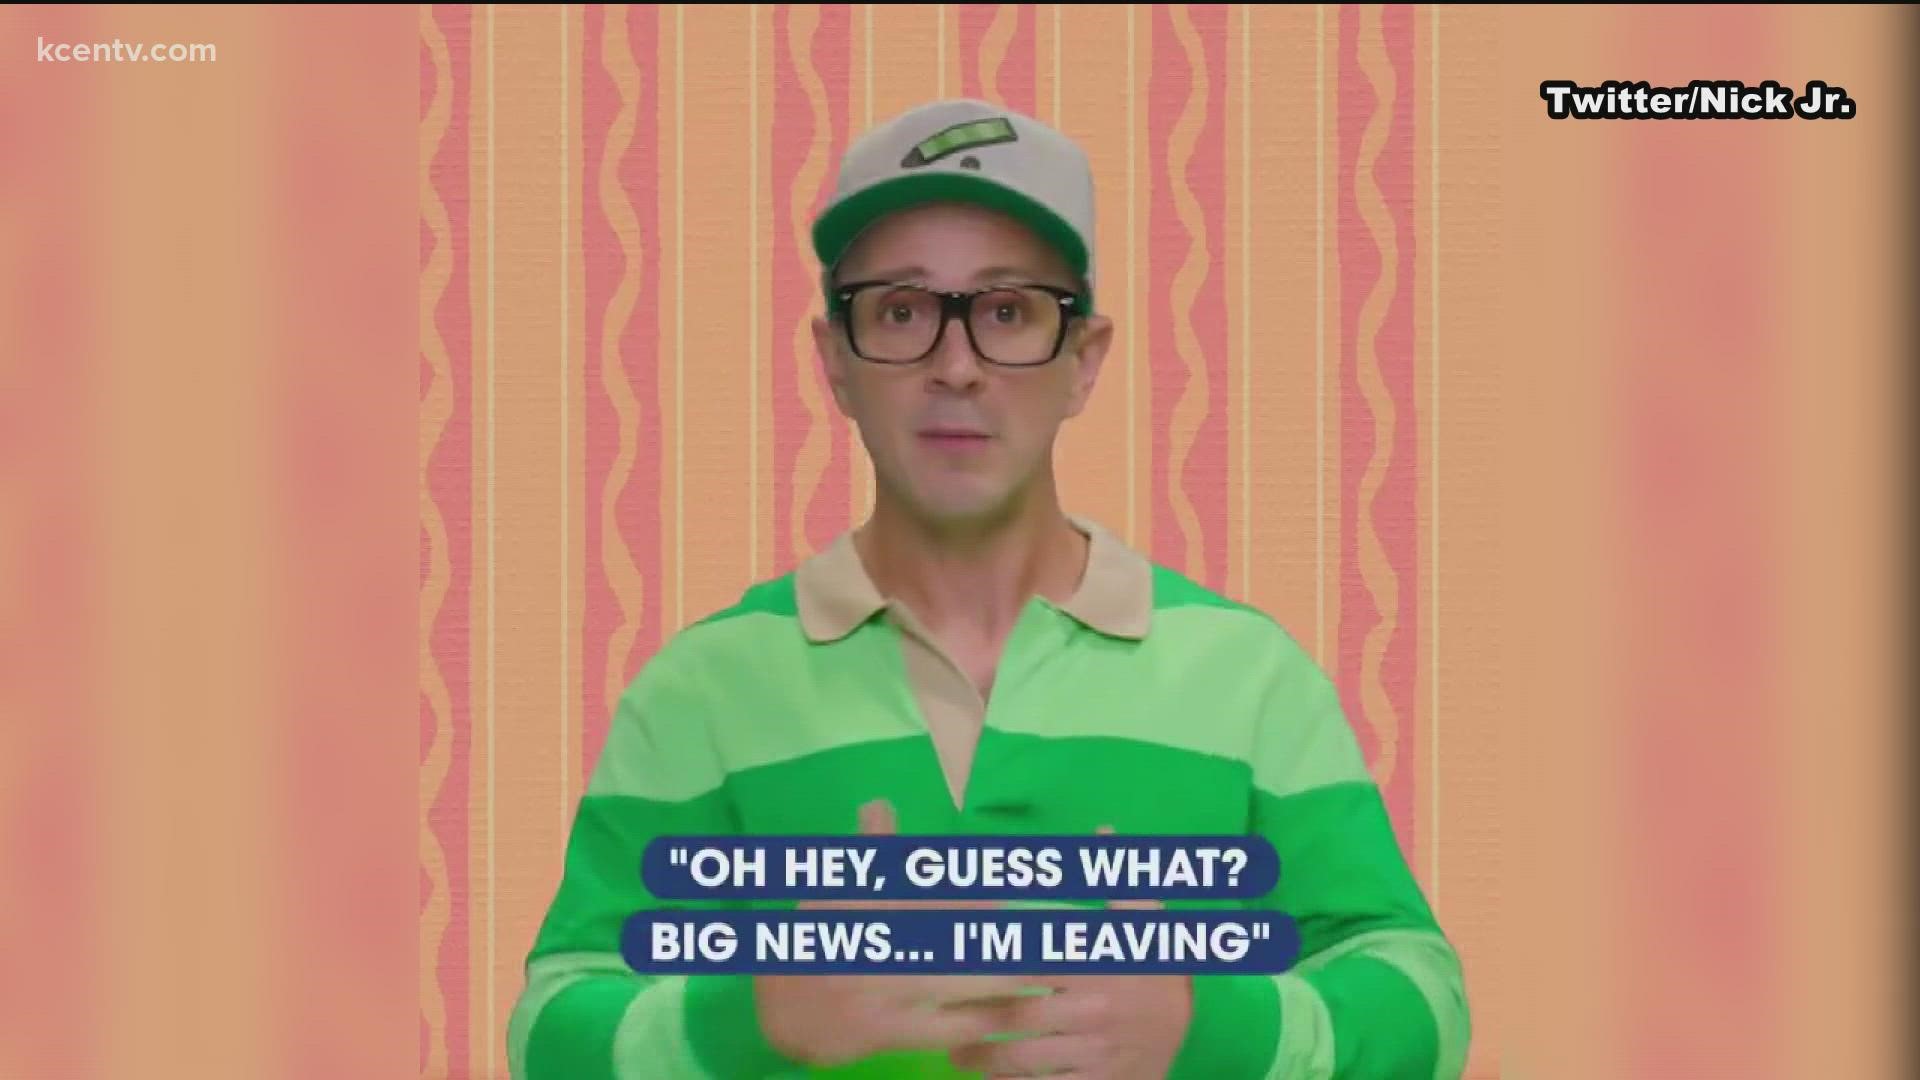 Nick Jr. took to Twitter to share a message about the former host leaving for college